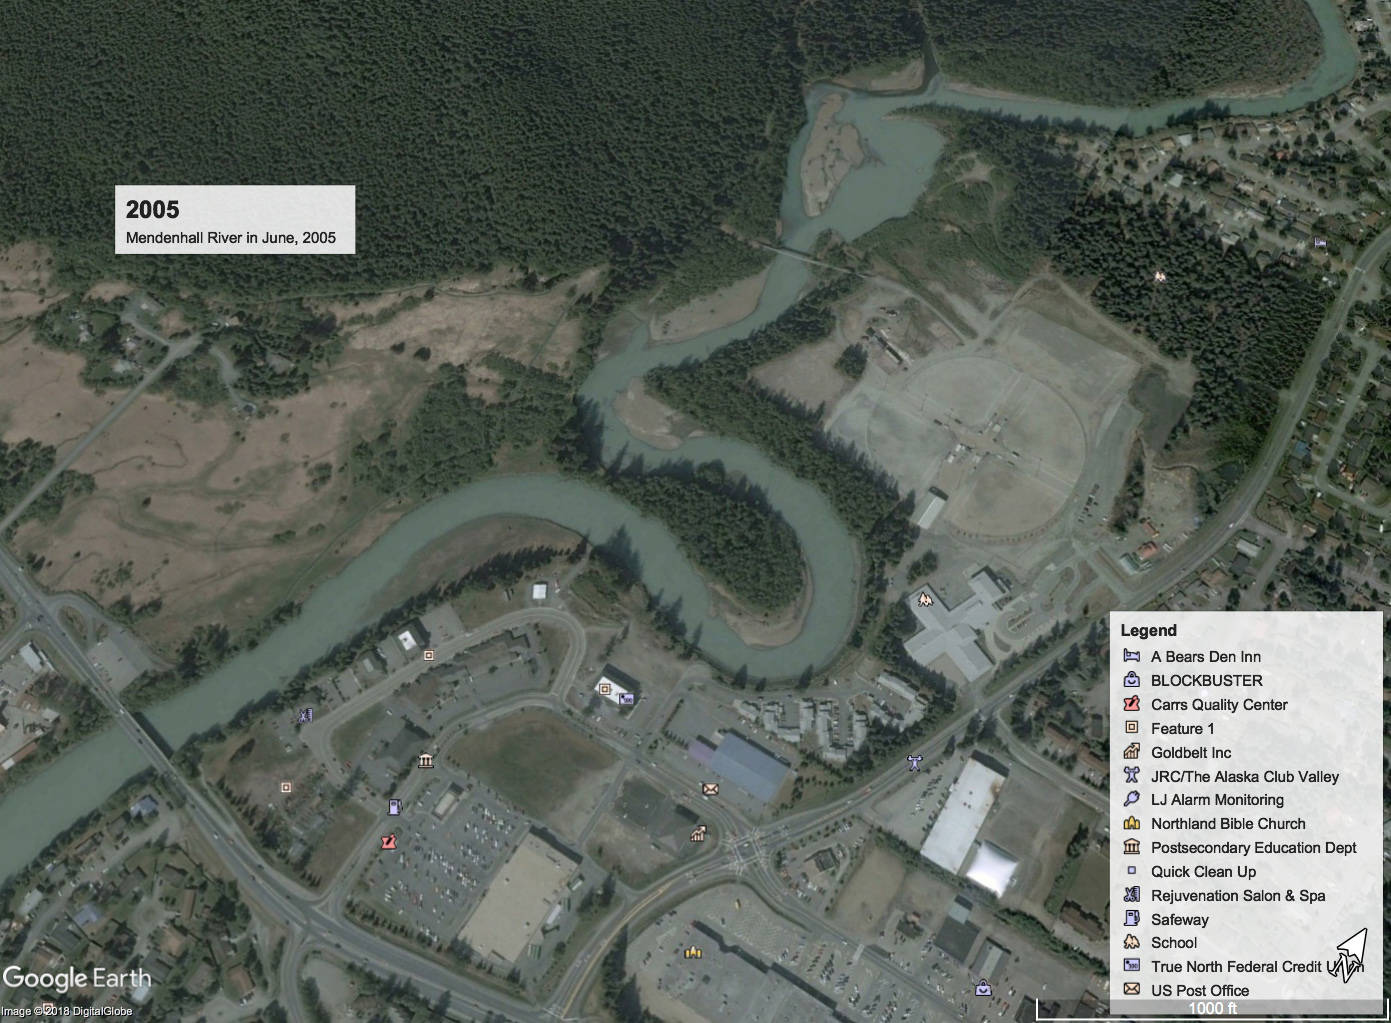 The Mendenhall River near Brotherhood Bridge Trail as seen in June, 2005 in satellite imagery. Water has broken through the narrow bit of land seperating each arm of the riverbend pictured at center, changing how erosion works in the area. (Google Earth)